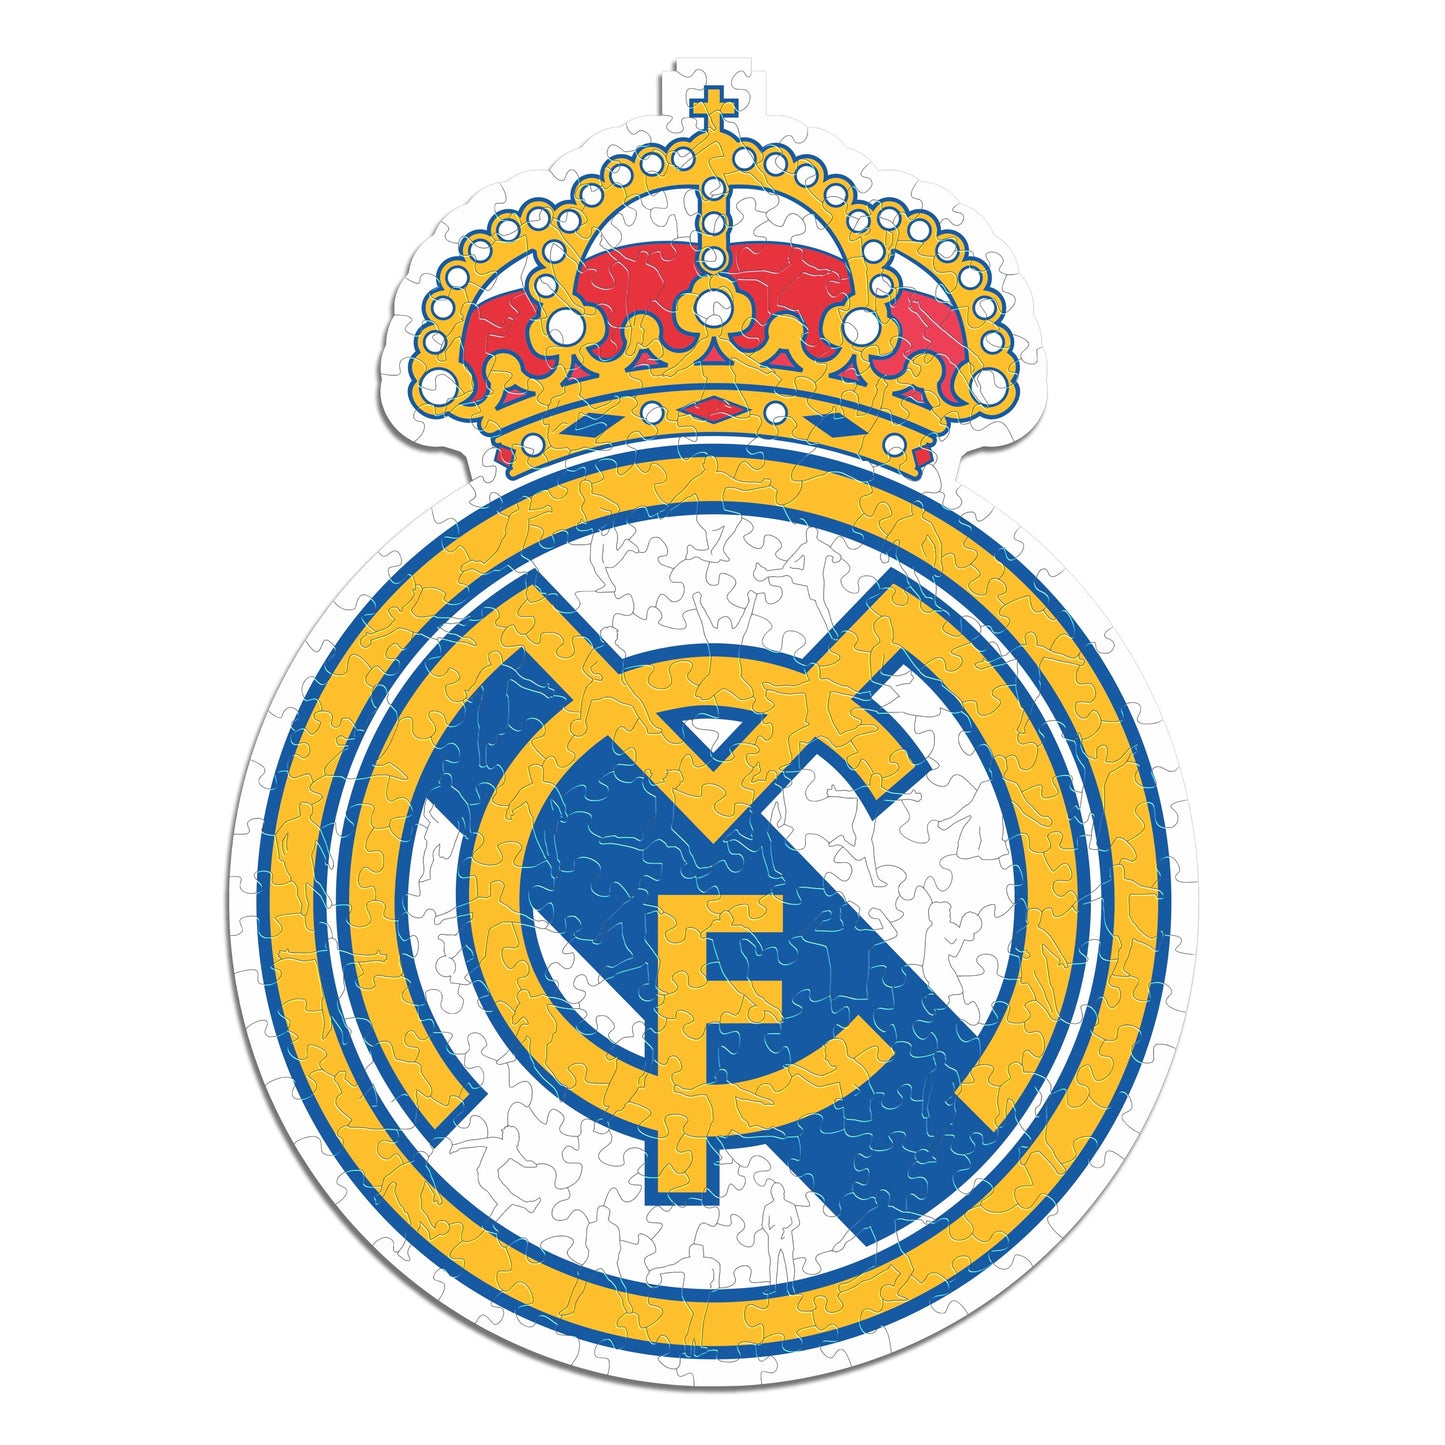 Real Madrid CF® Crest - Wooden Puzzle